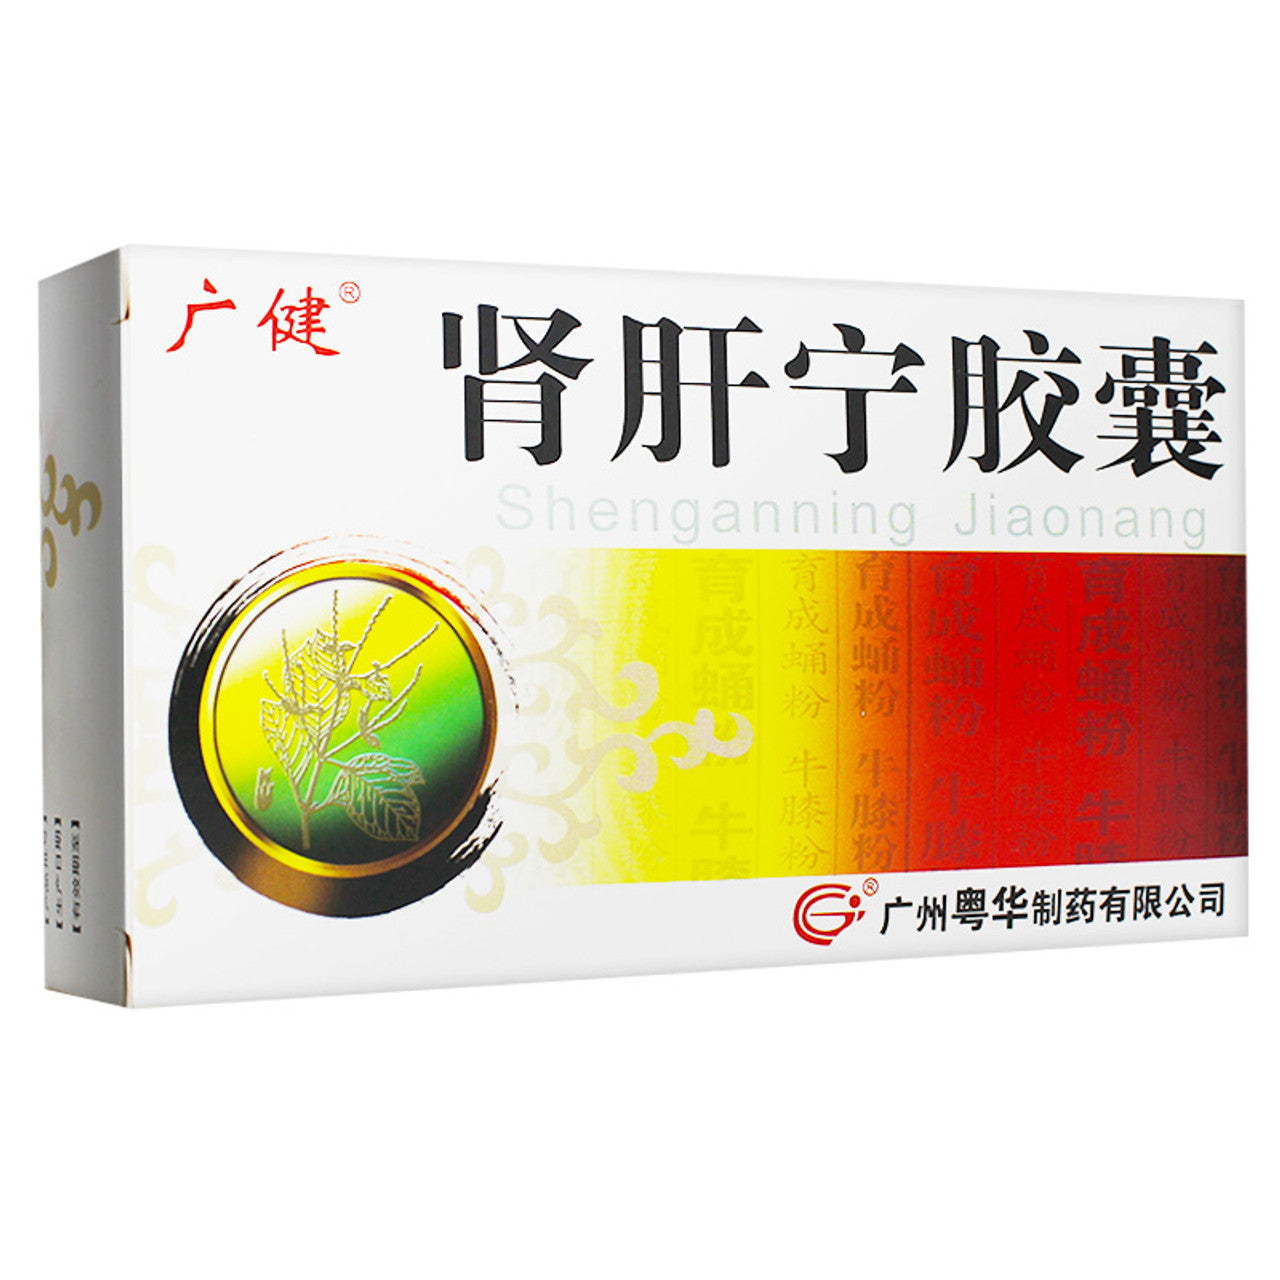 (36 capsules*5 boxes/lot). Traditional Chinese Medicine. Shenganning Jiaonang or Shen Gan Ning Capsule Nourish the liver and kidney, strengthen the body. For glomerulonephritis and nephrotic syndrome. Hepatitis A, liver cirrhosis, etc.